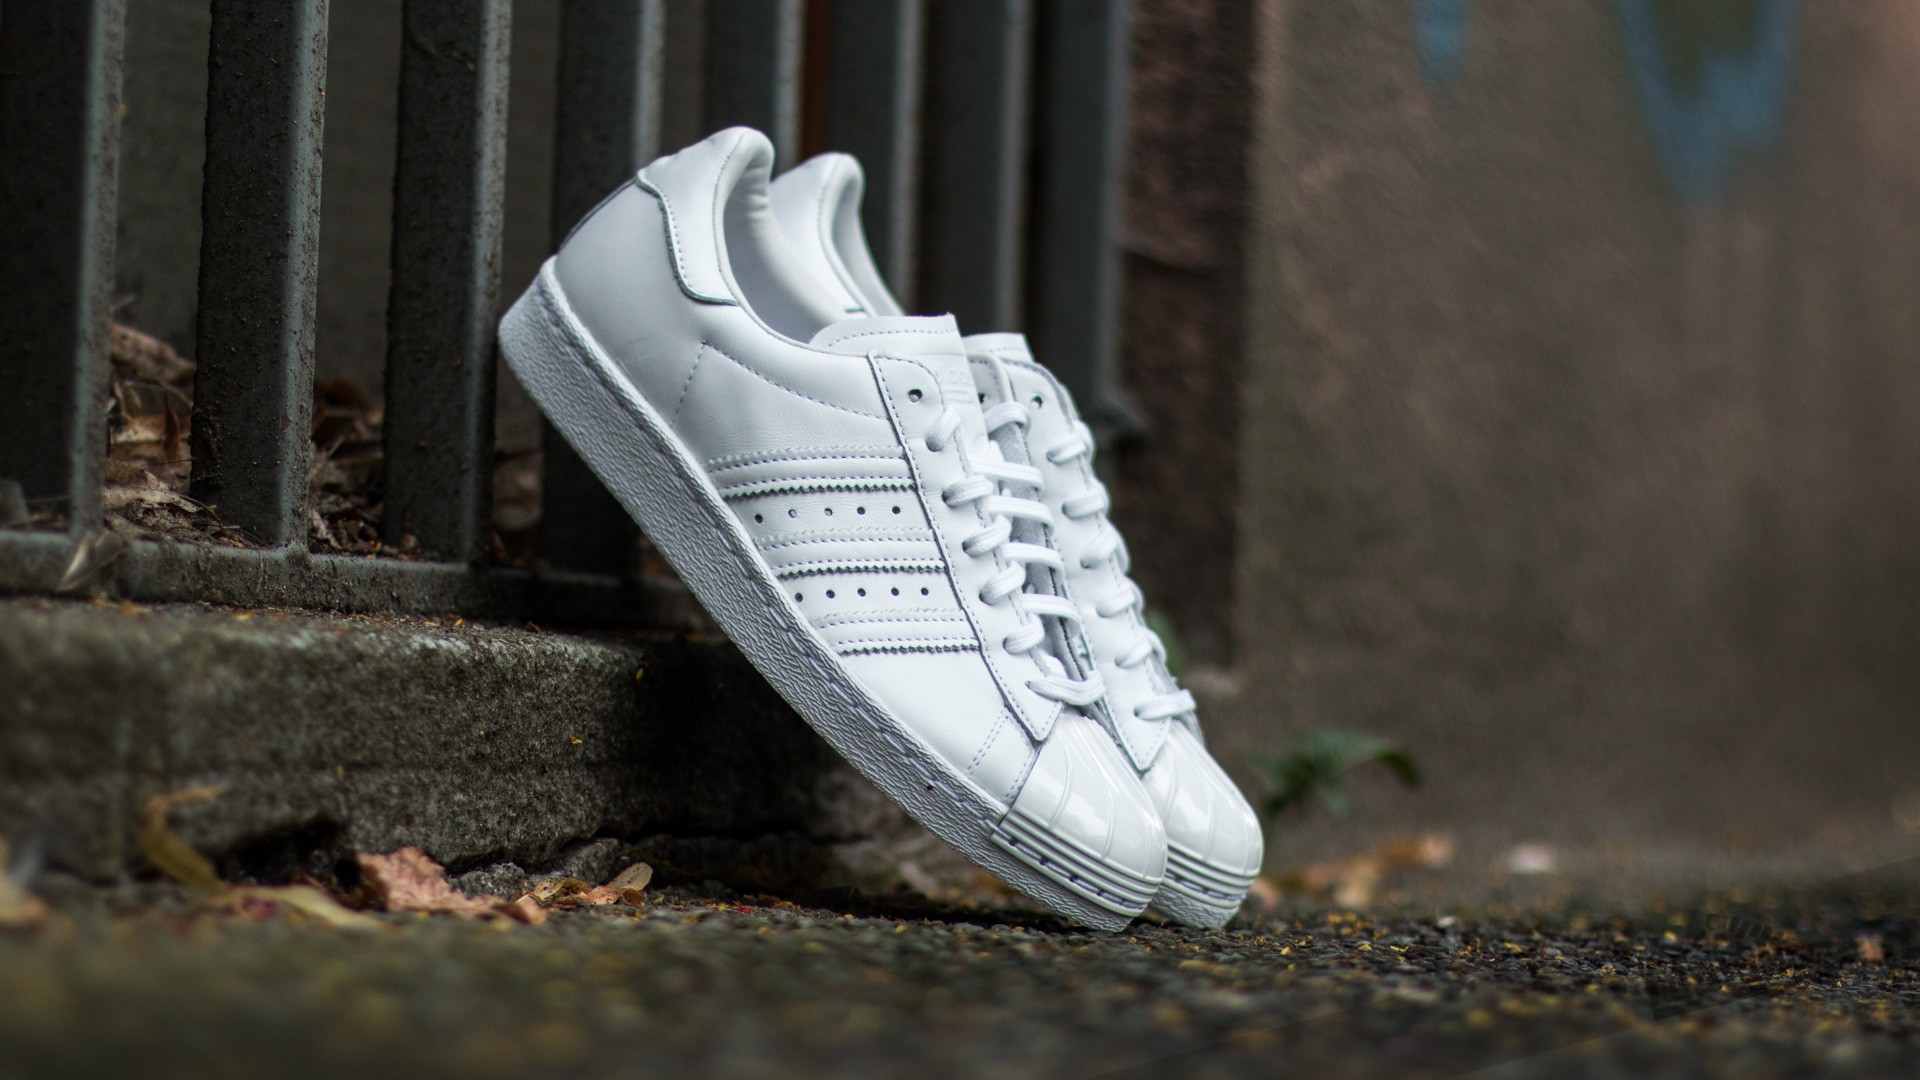 Women's shoes adidas Superstar 80s Metal Toe W Ftw White/ Ftw White/ Core Black